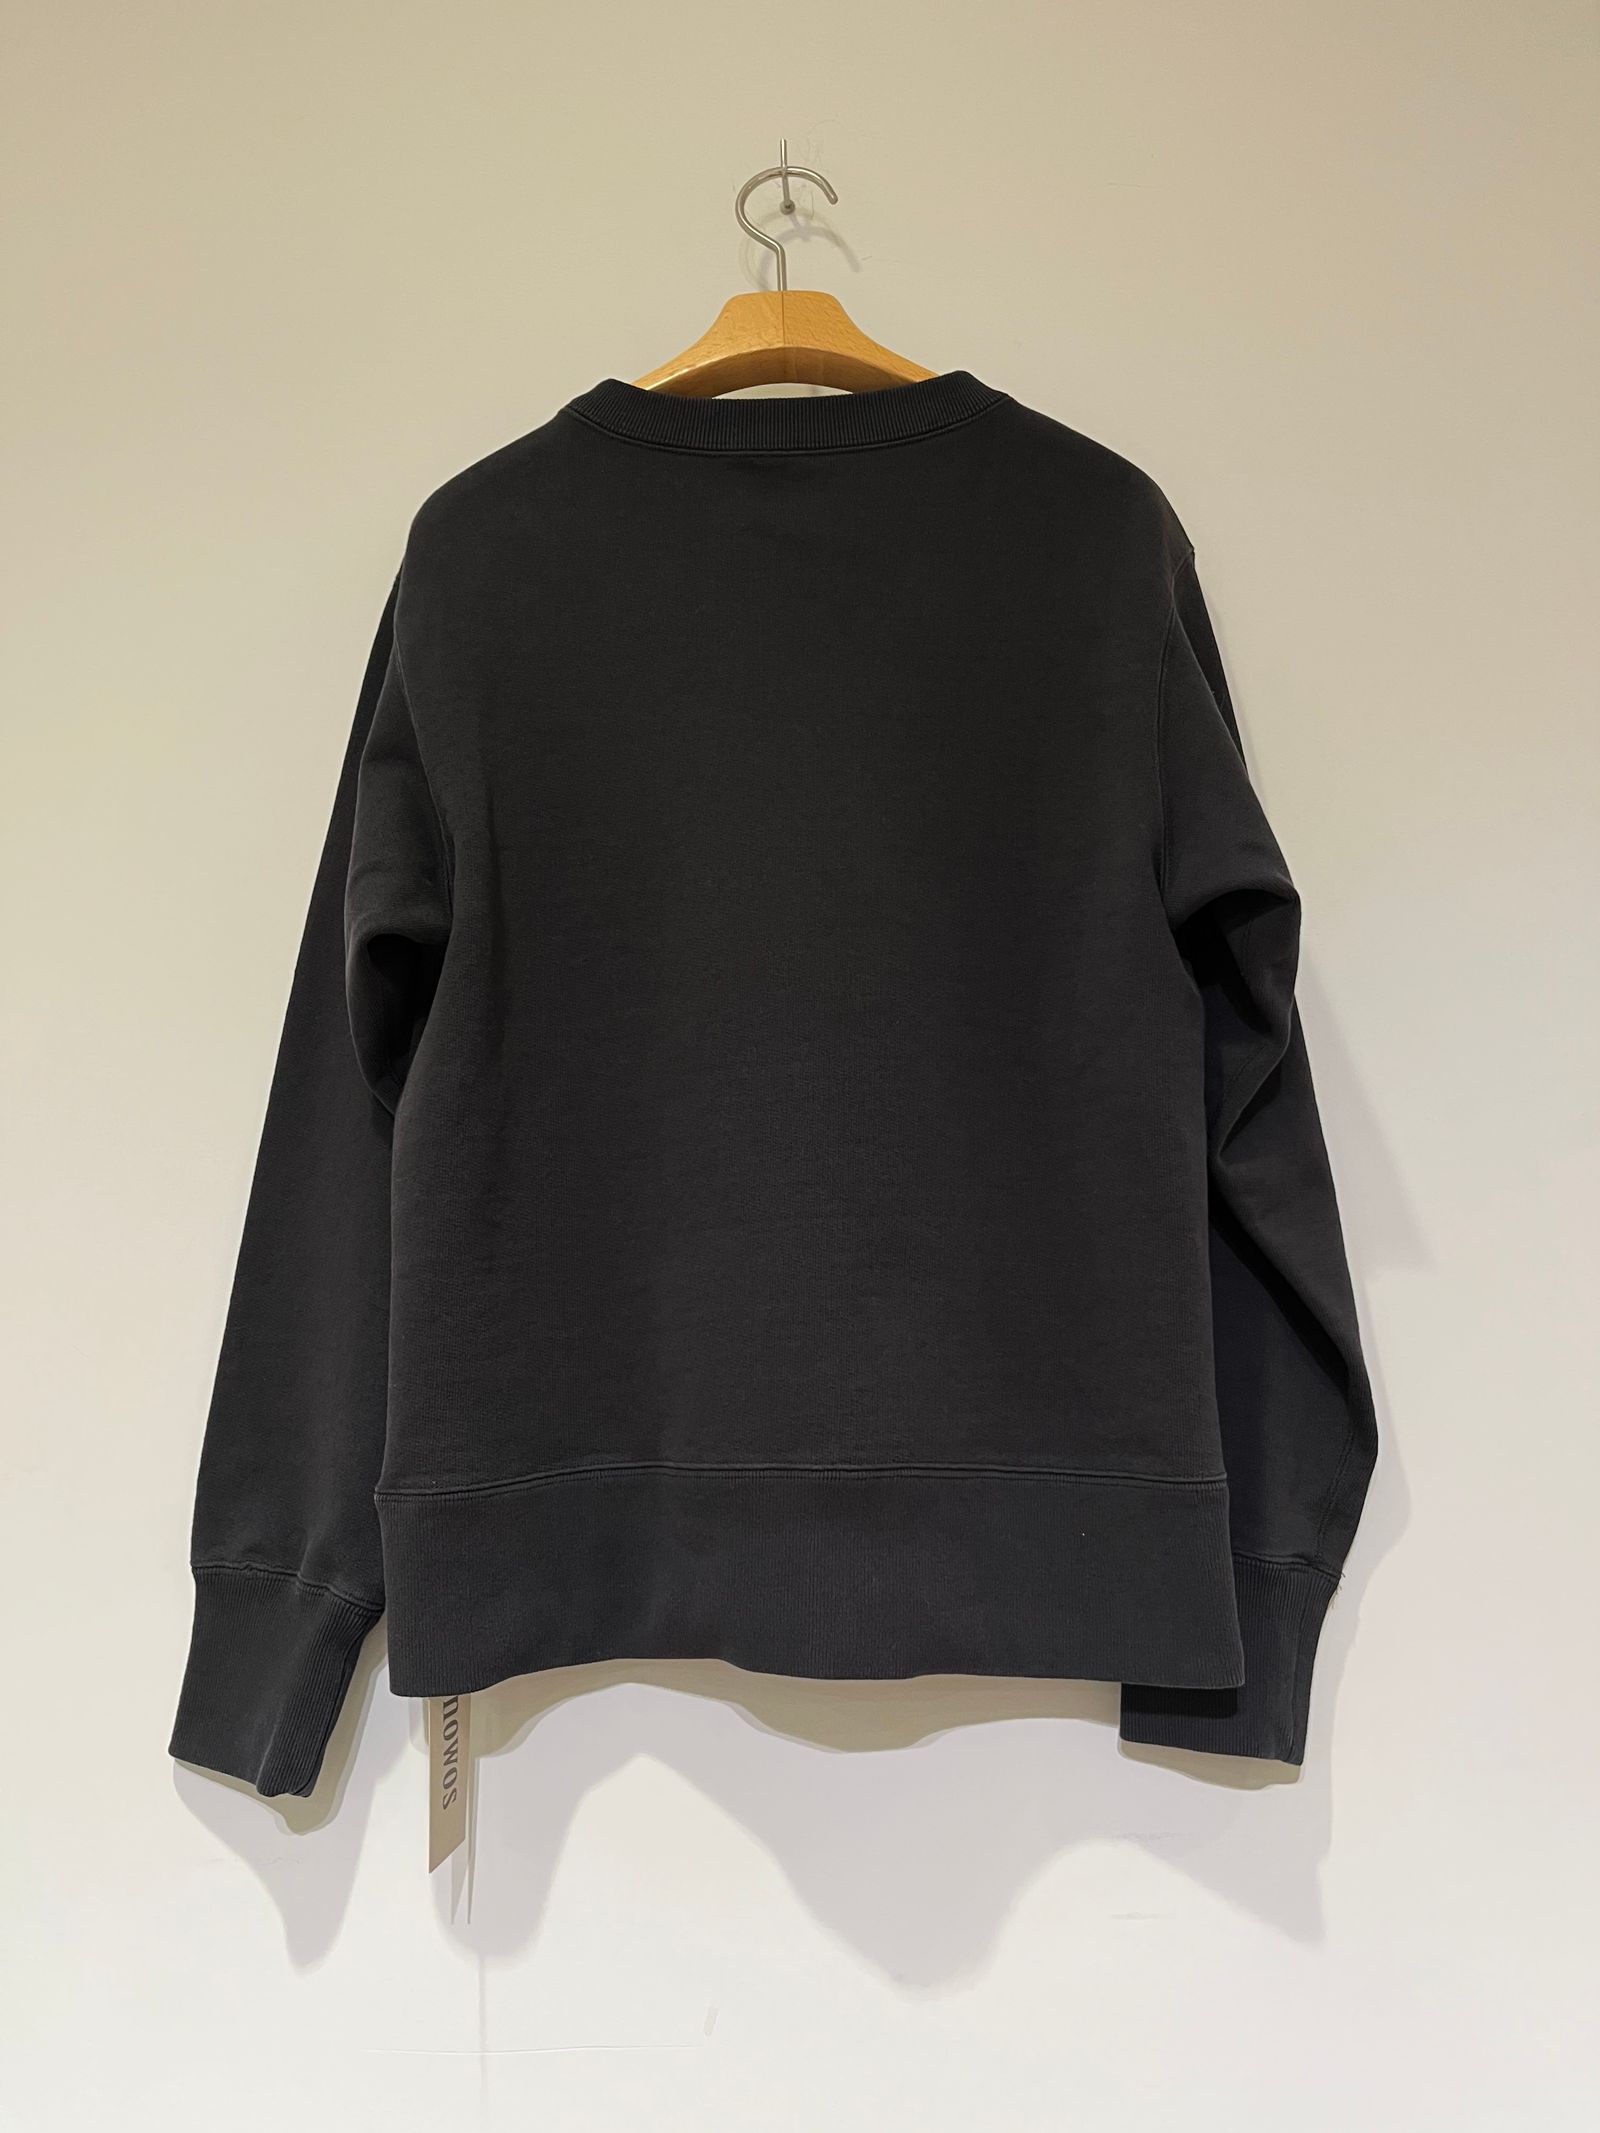 nowos - Printed Sweat Shirt nowos ノーウォス ロゴスウェット ...